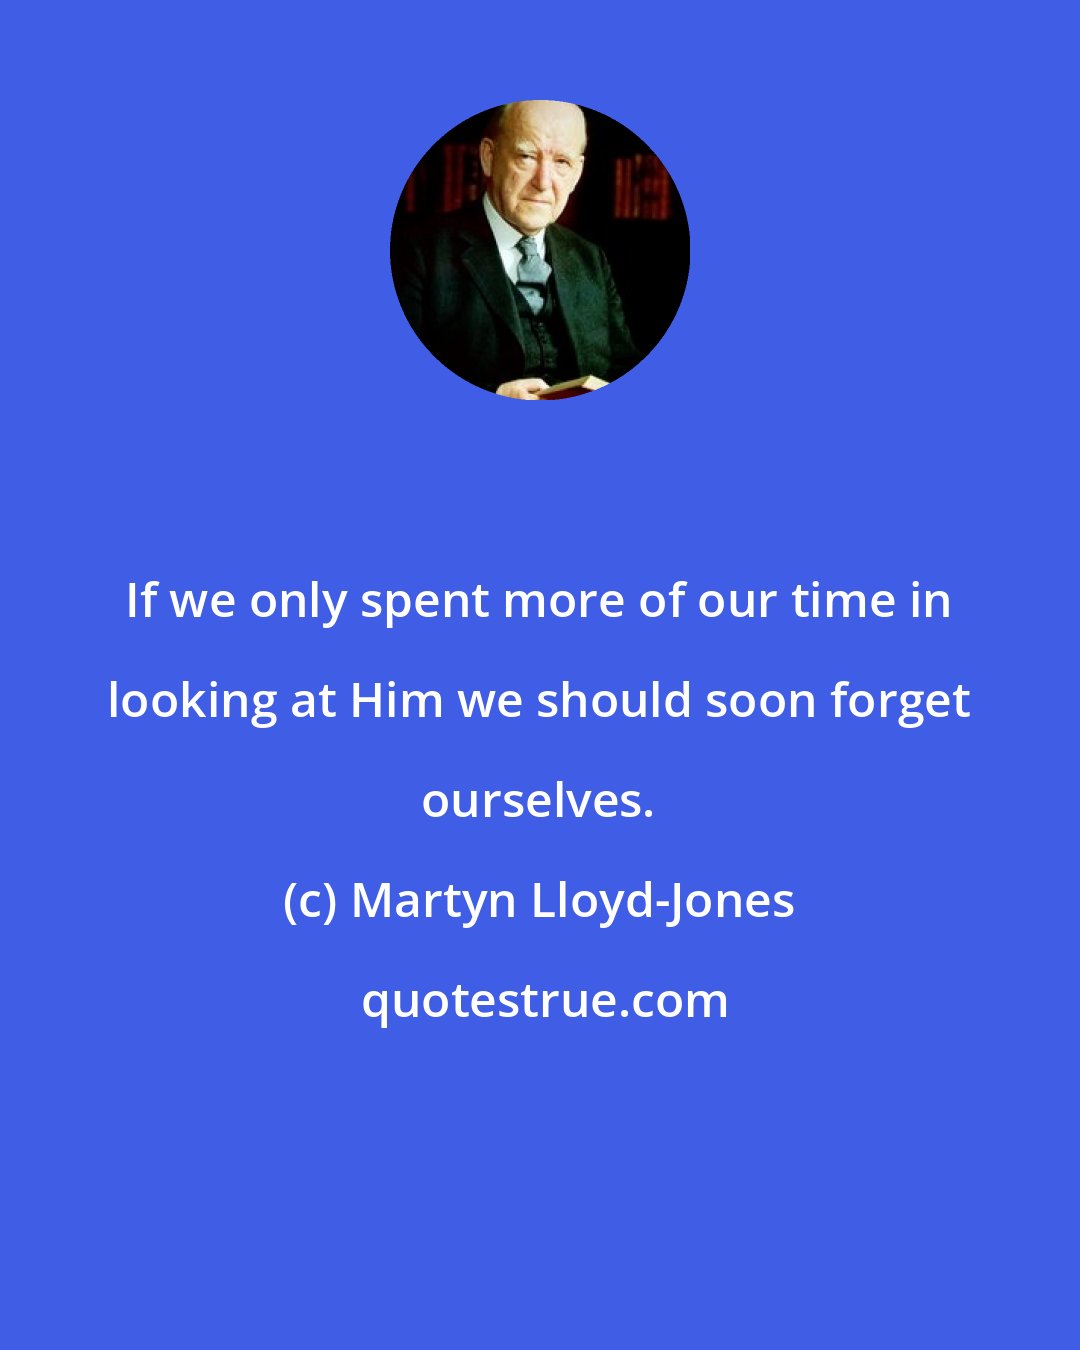 Martyn Lloyd-Jones: If we only spent more of our time in looking at Him we should soon forget ourselves.